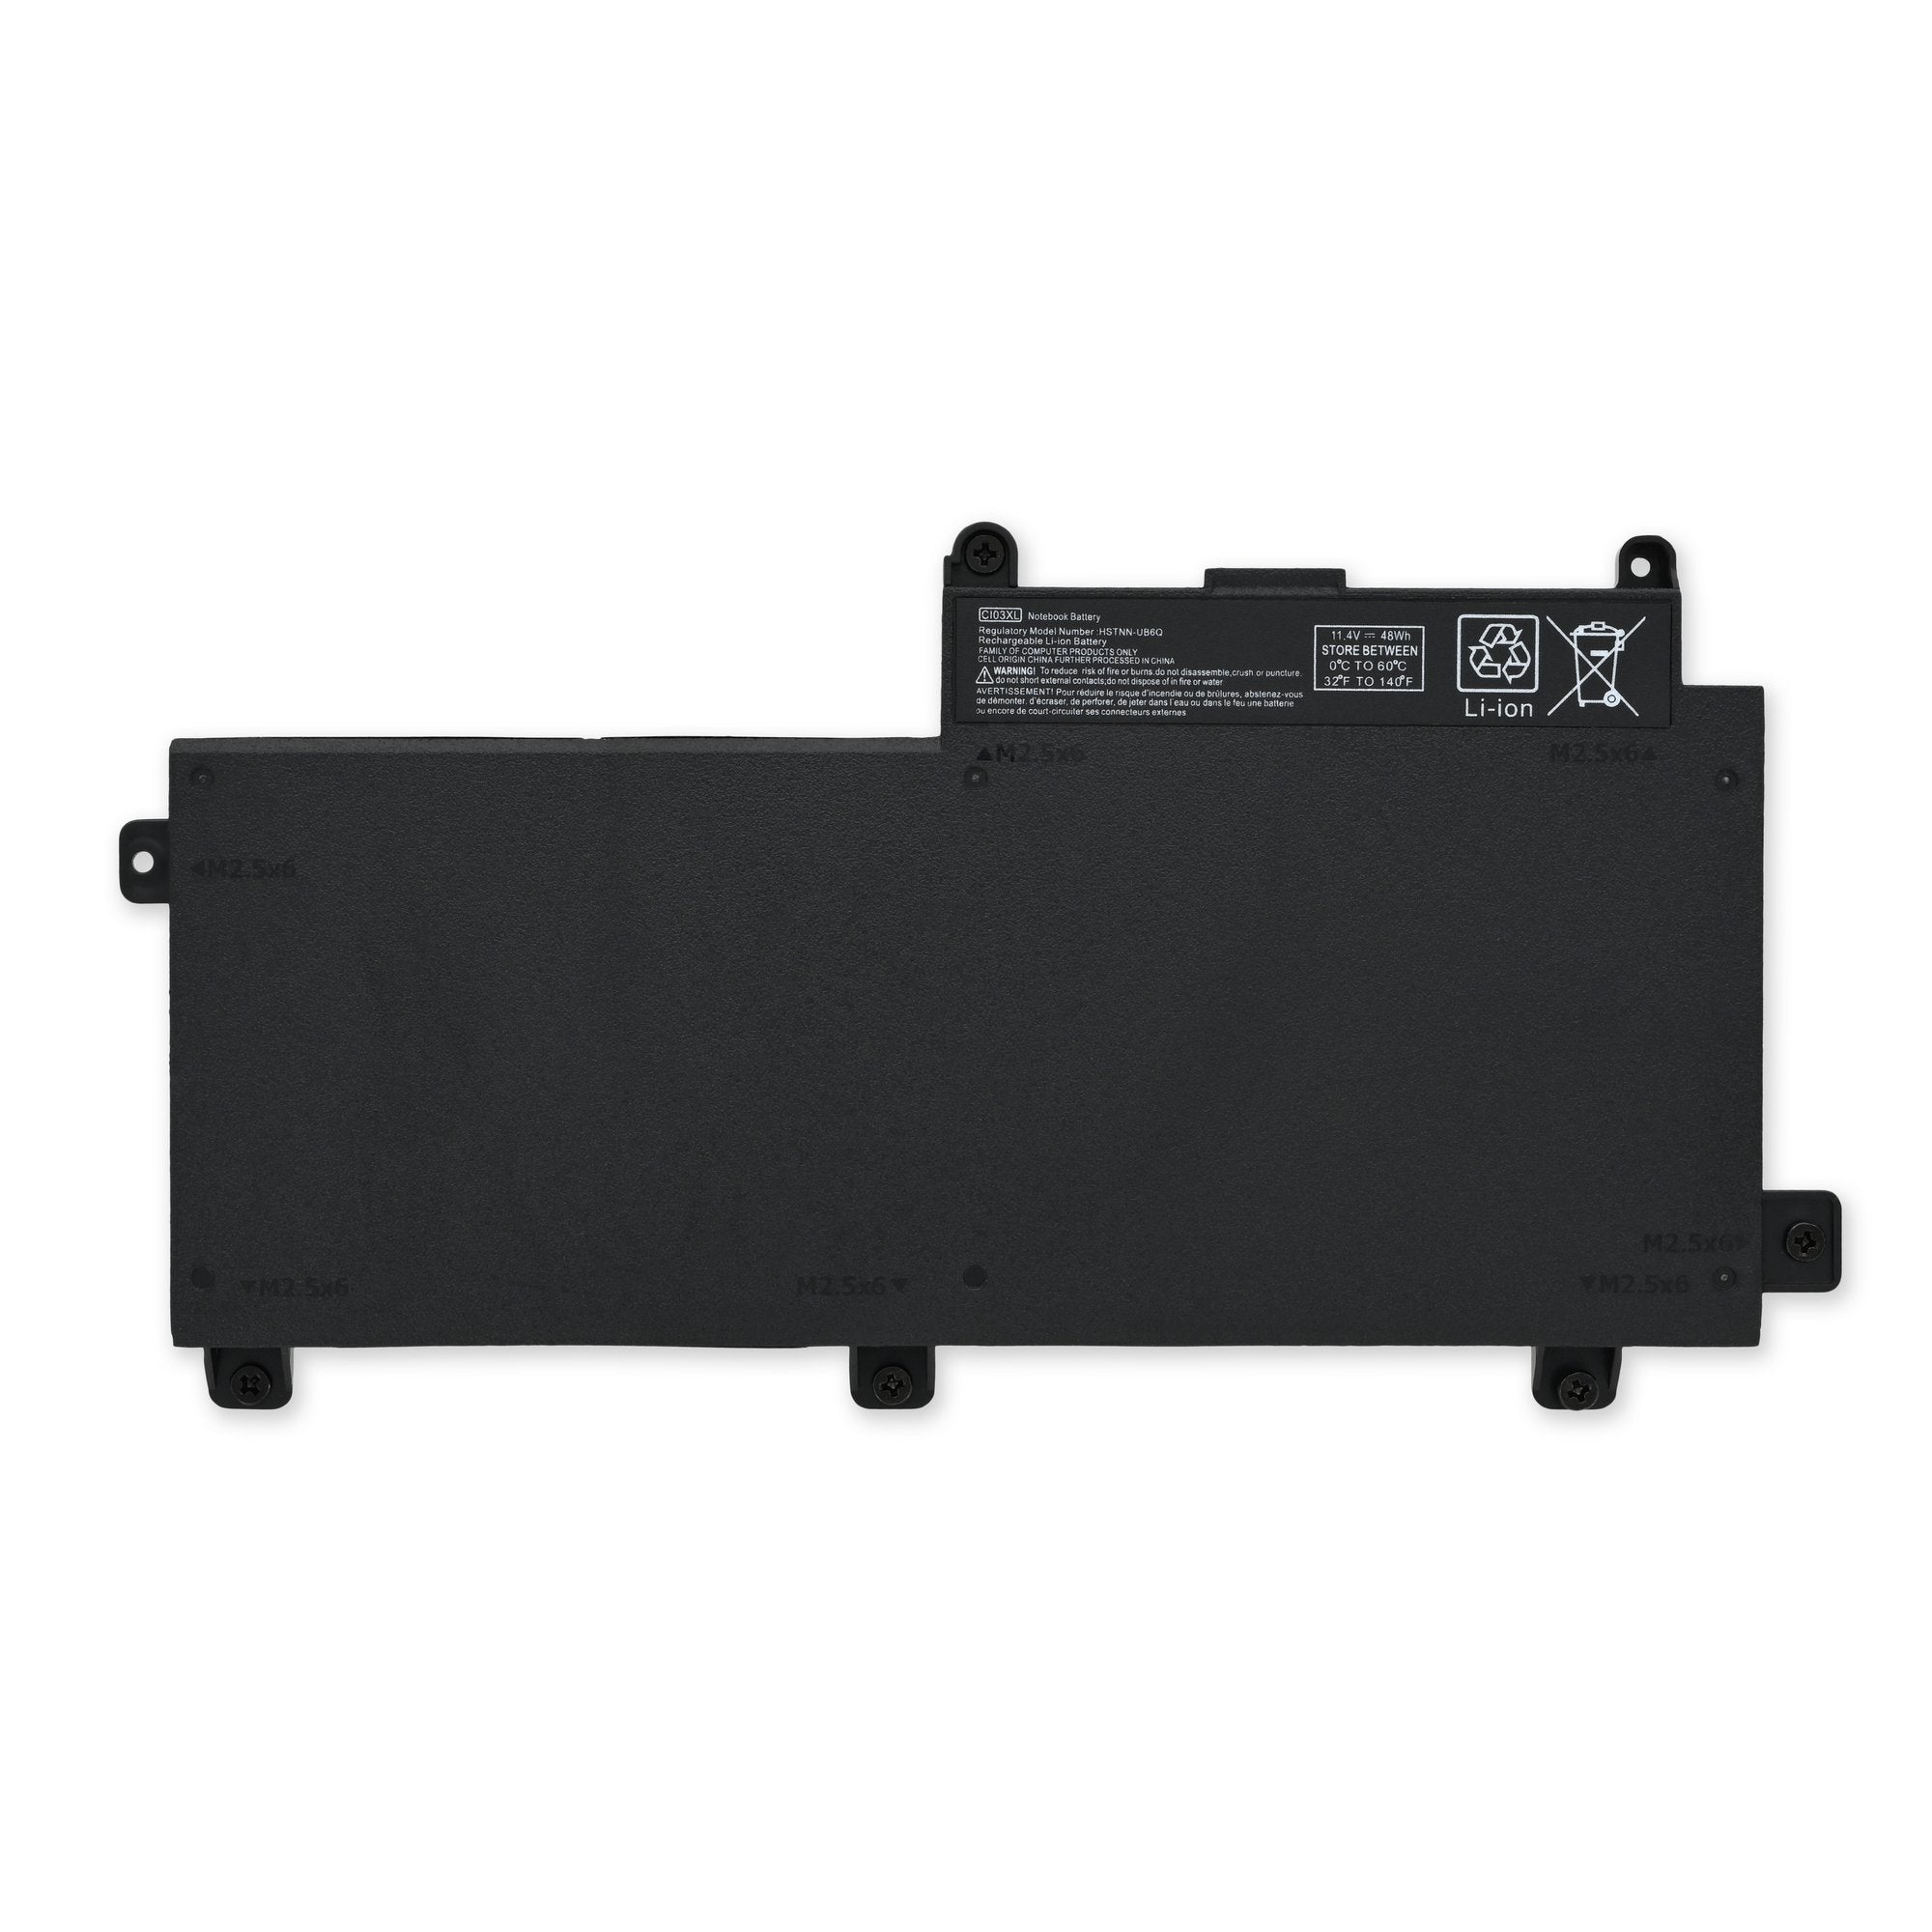 HP CIO3XL Battery New Part Only